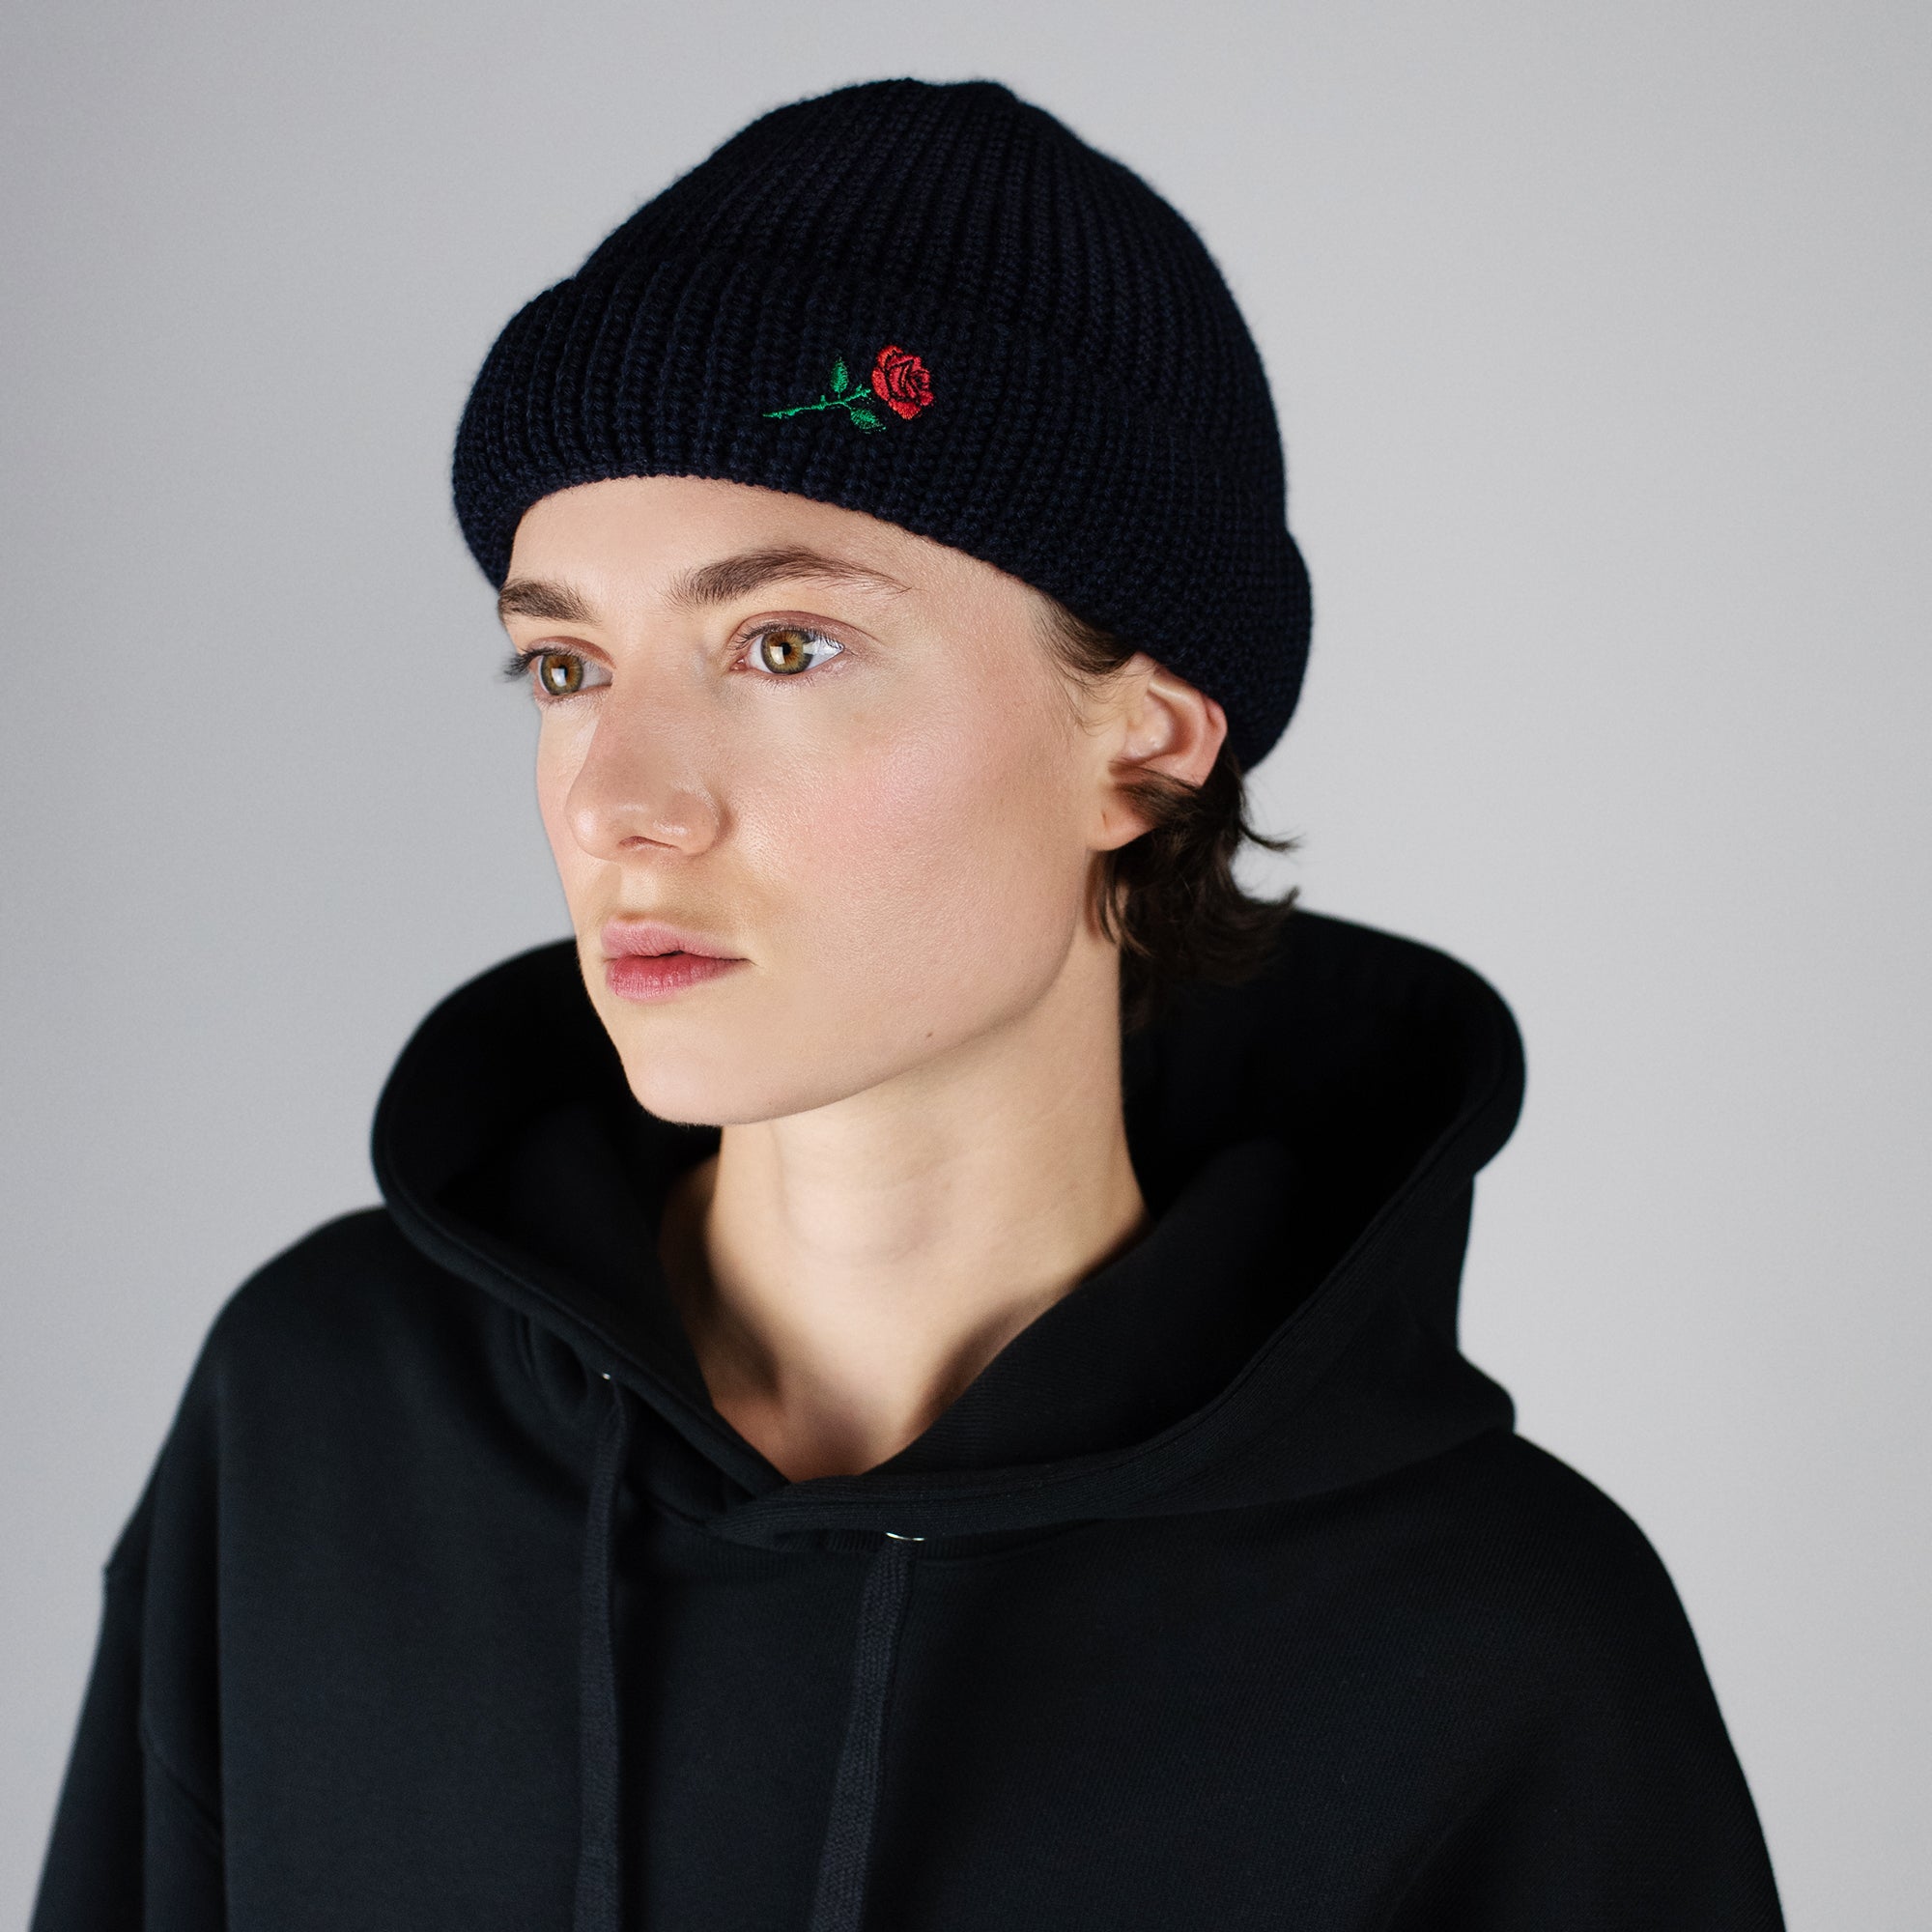 SHORT WOOL BEANIE ROSE EMBROIDERY - NAVY